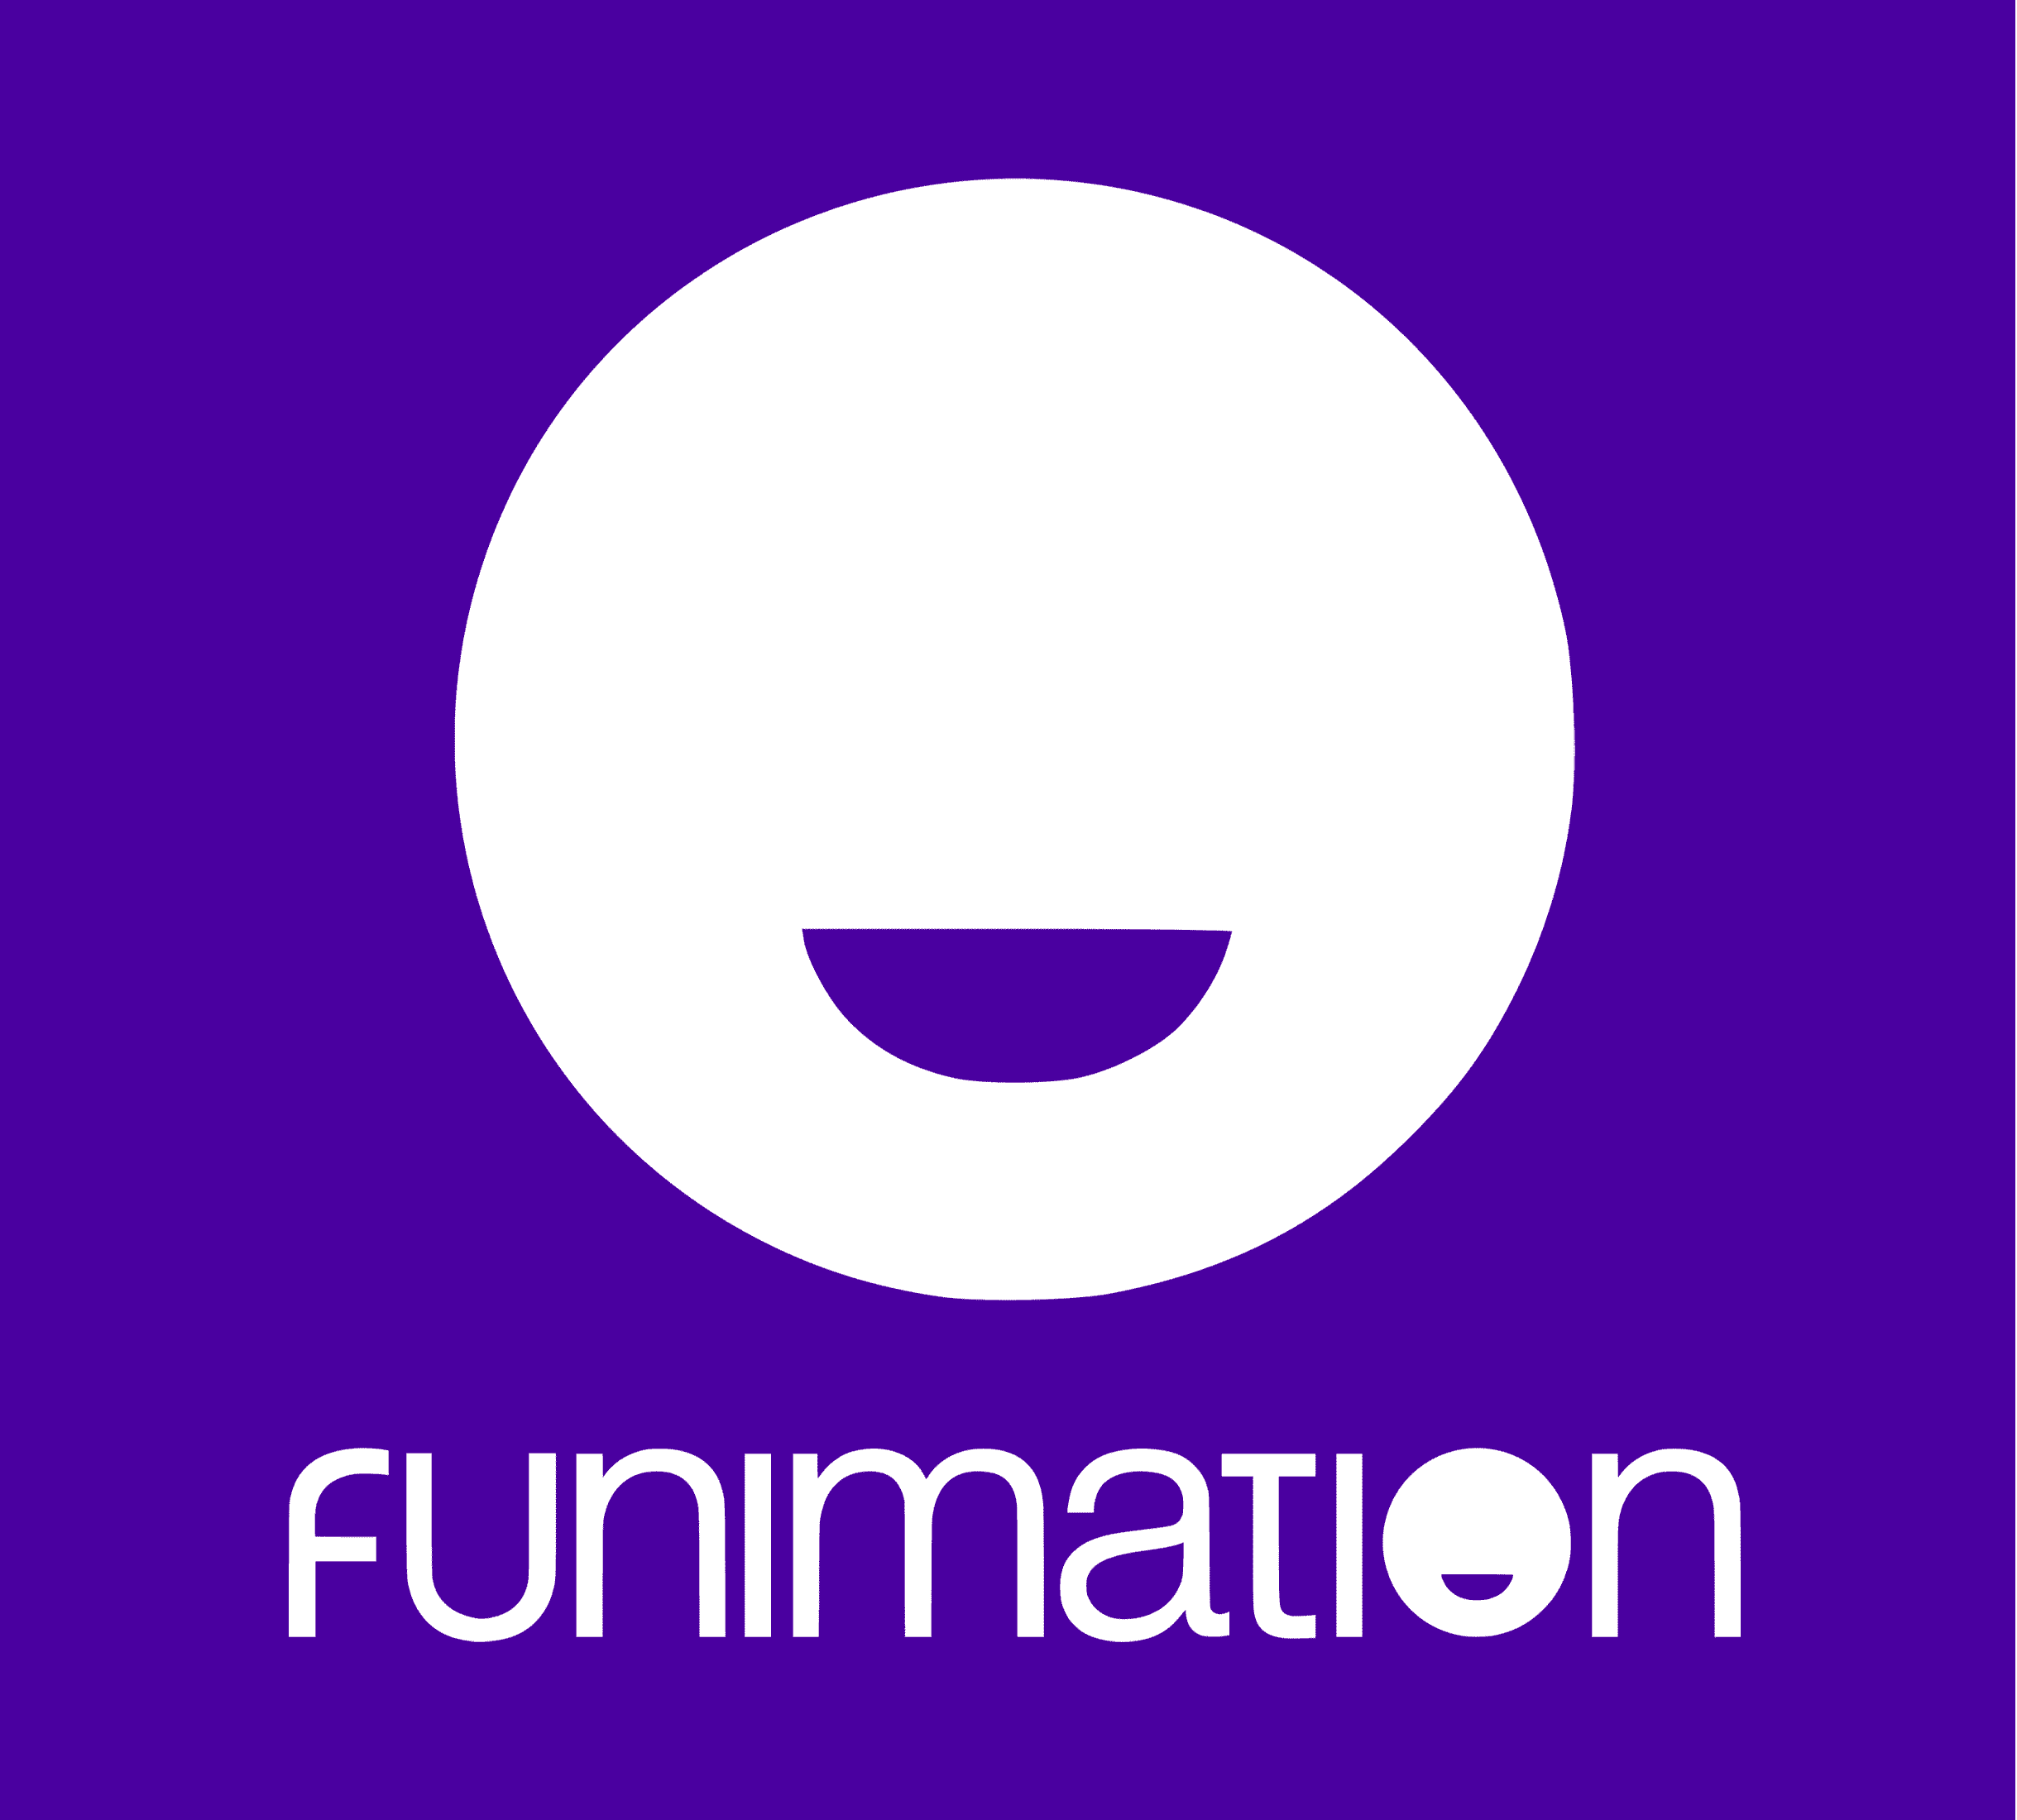 Farewell to Funimation: Legacy Subscribers Face Price Hikes and Digital Library Wipeout